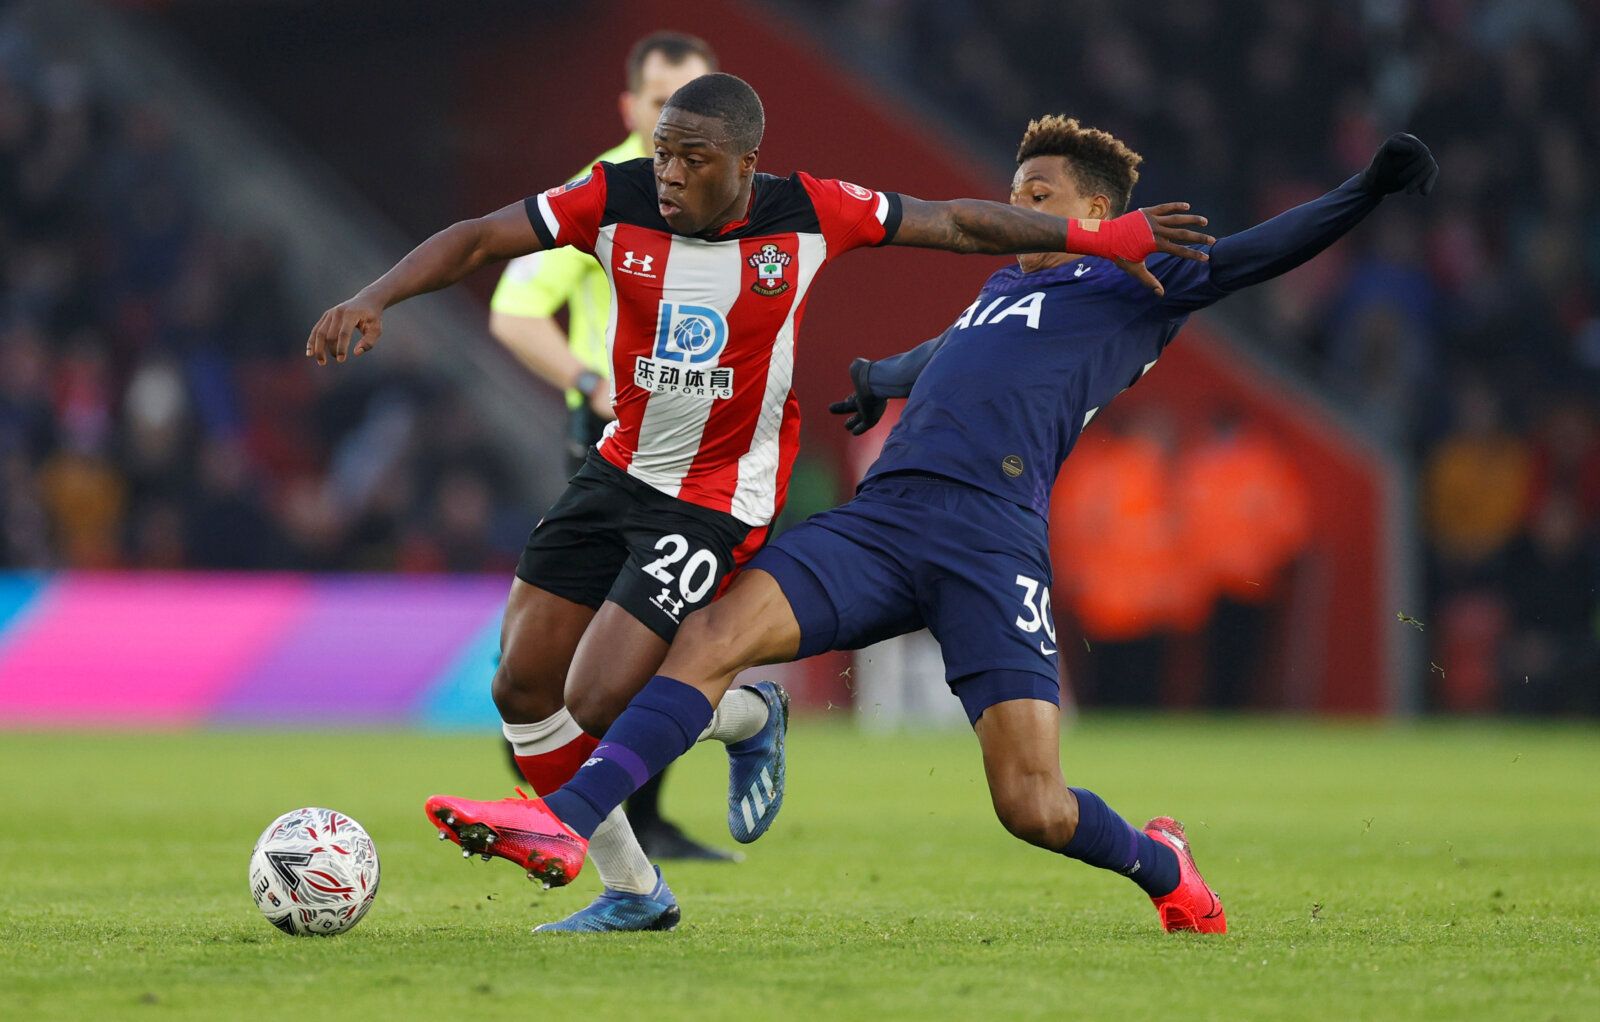 Soccer Football - FA Cup Fourth Round - Southampton v Tottenham Hotspur - St Mary's Stadium, Southampton, Britain - January 25, 2020  Southampton's Michael Obafemi in action with Tottenham Hotspur's Gedson Fernandes      Action Images via Reuters/John Sibley